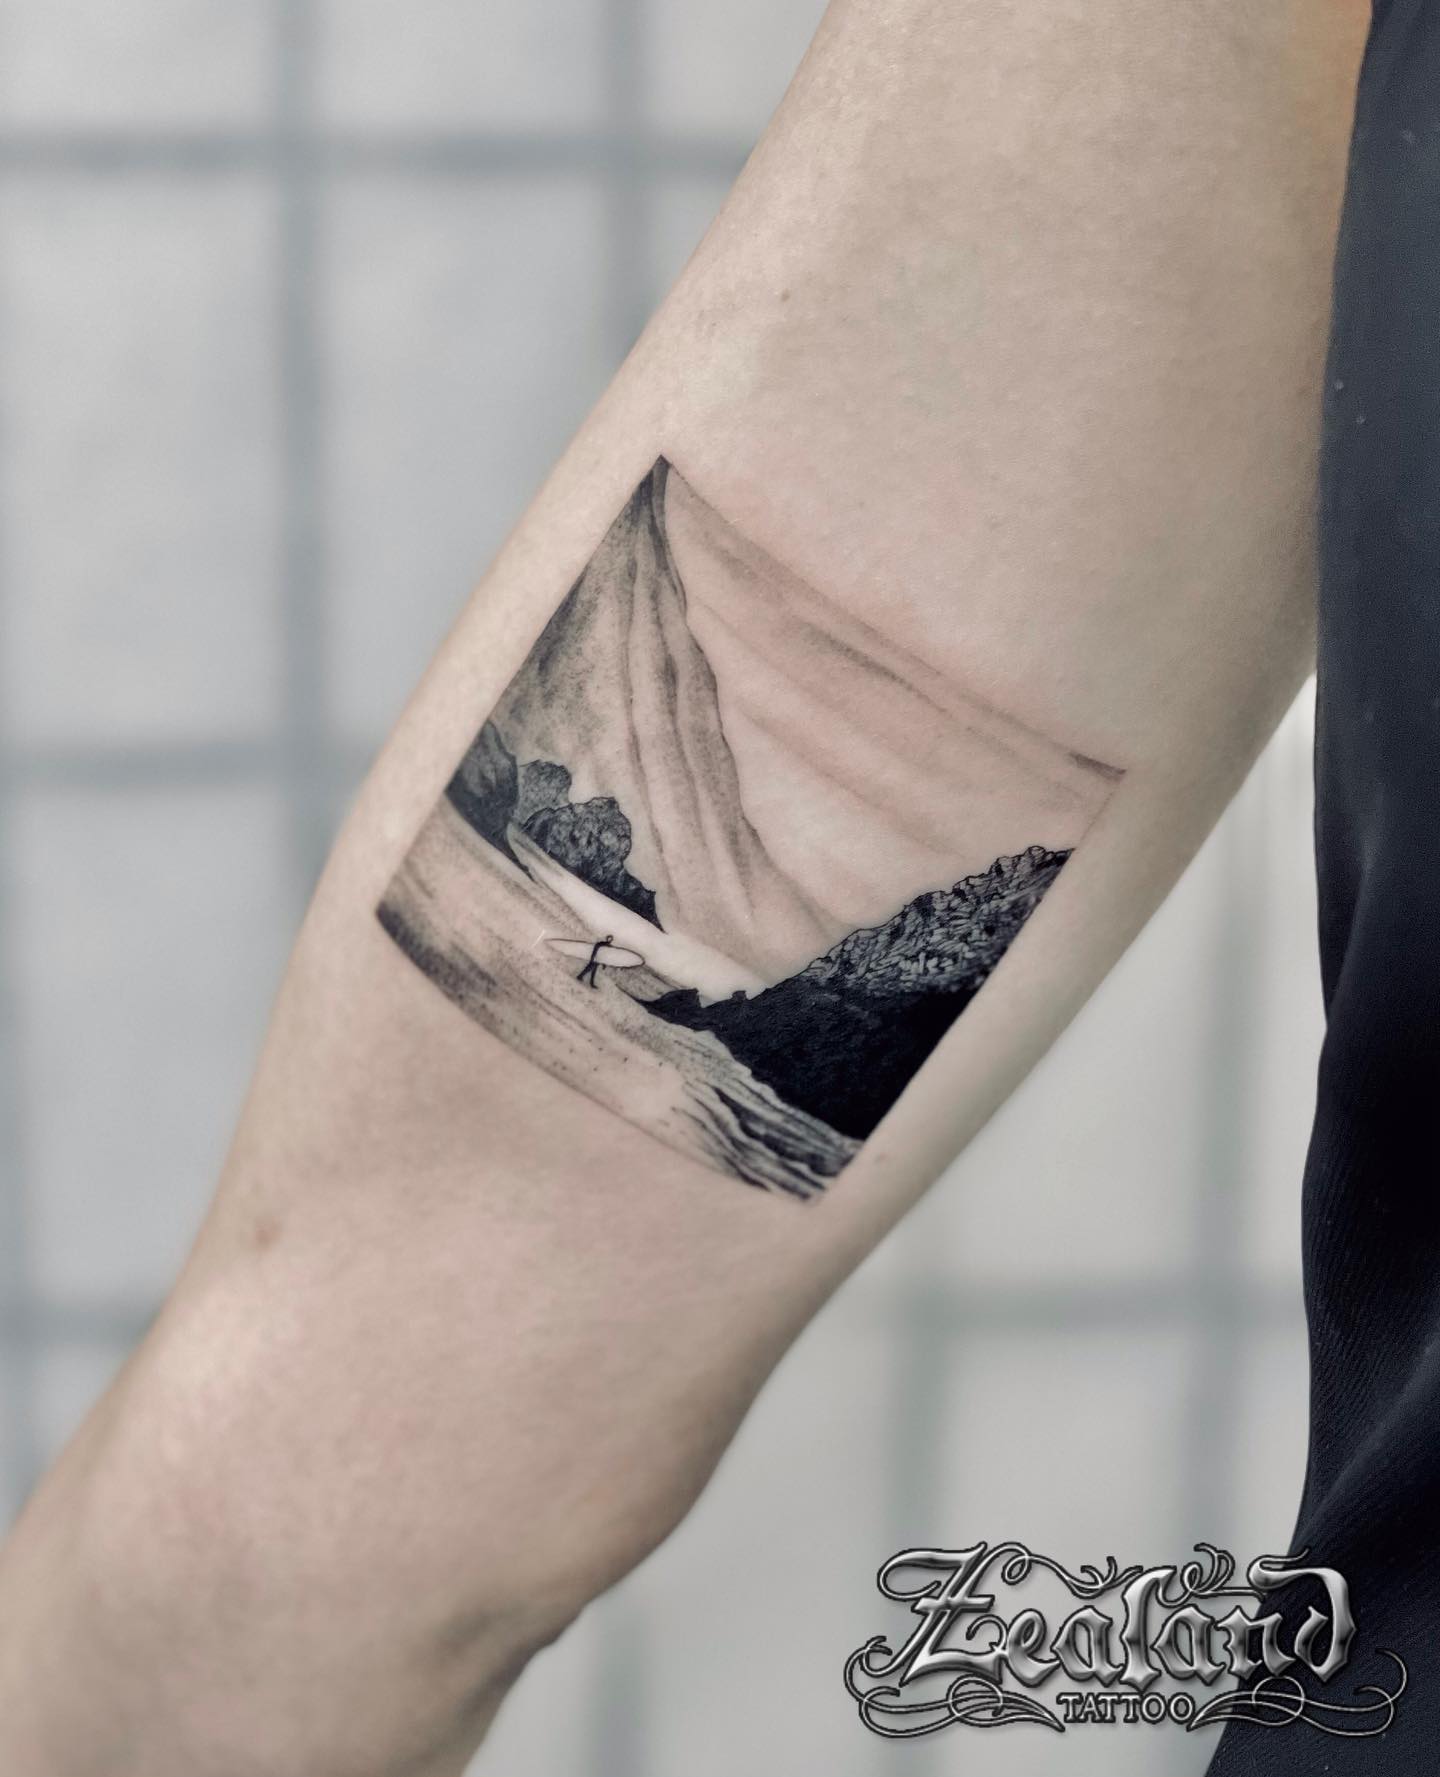 Some cool fine line mountains by resident artist inknetch contact him  directly to book your idea or his all welcome mountaintattoo  Instagram